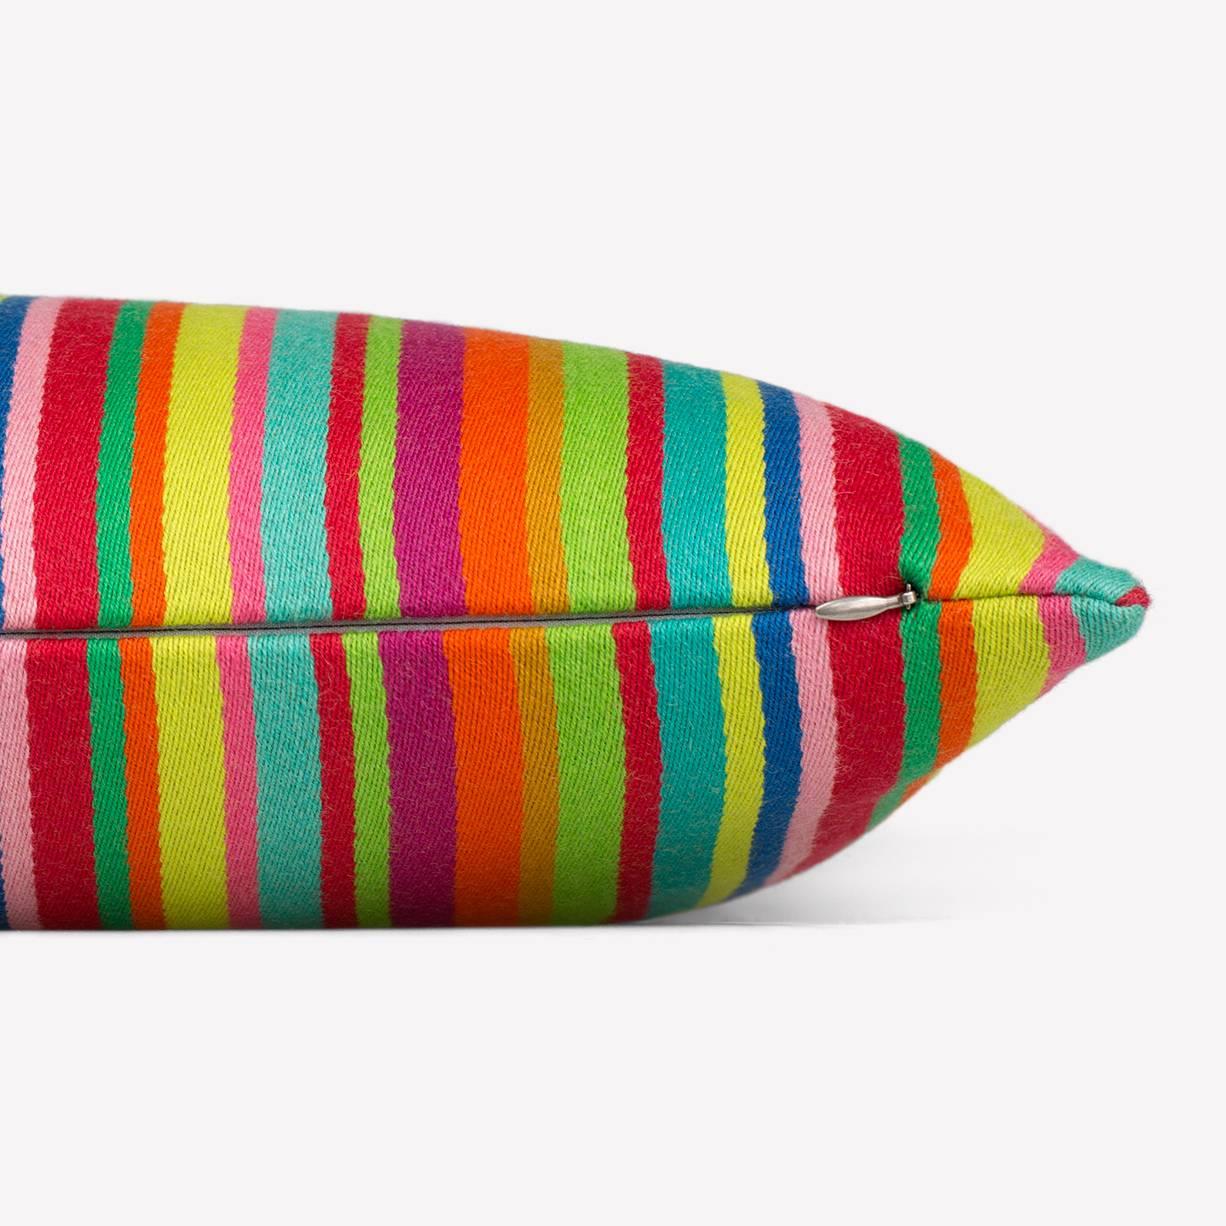 Maharam Pillow
Millerstripe by Alexander Girard 
001 Multicolored

Girard drew inspiration from his travels to Mexico and India, as well as from his fascination with traditional folk art. First designed for the Herman Miller Textile Division in